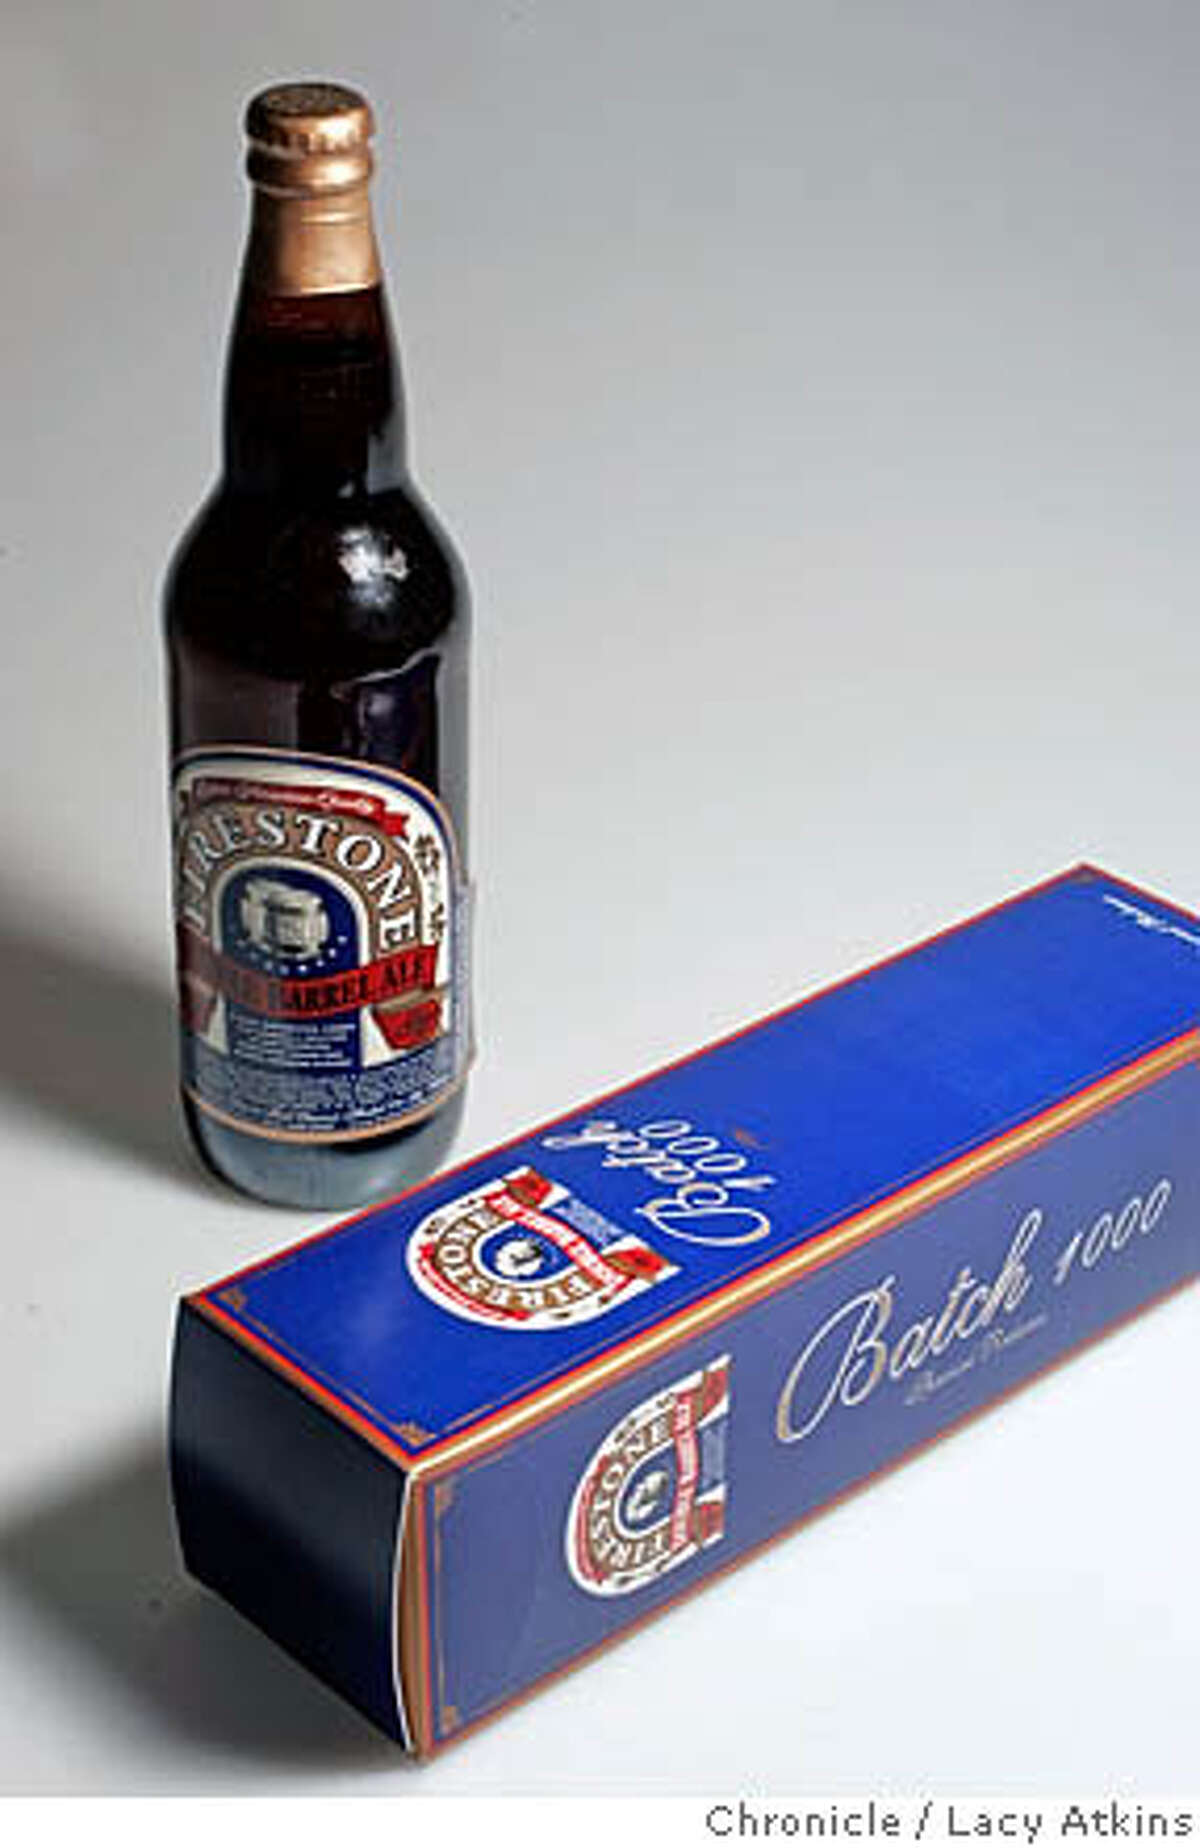 Please shoot the beer of the month, Firestone Walker Batch 1000 Double Barrel Ale. It comes in a gift box, so perhaps shoot both bottle and box in the same frame. DEC.22, 2005 Photo By Lacy Atkins